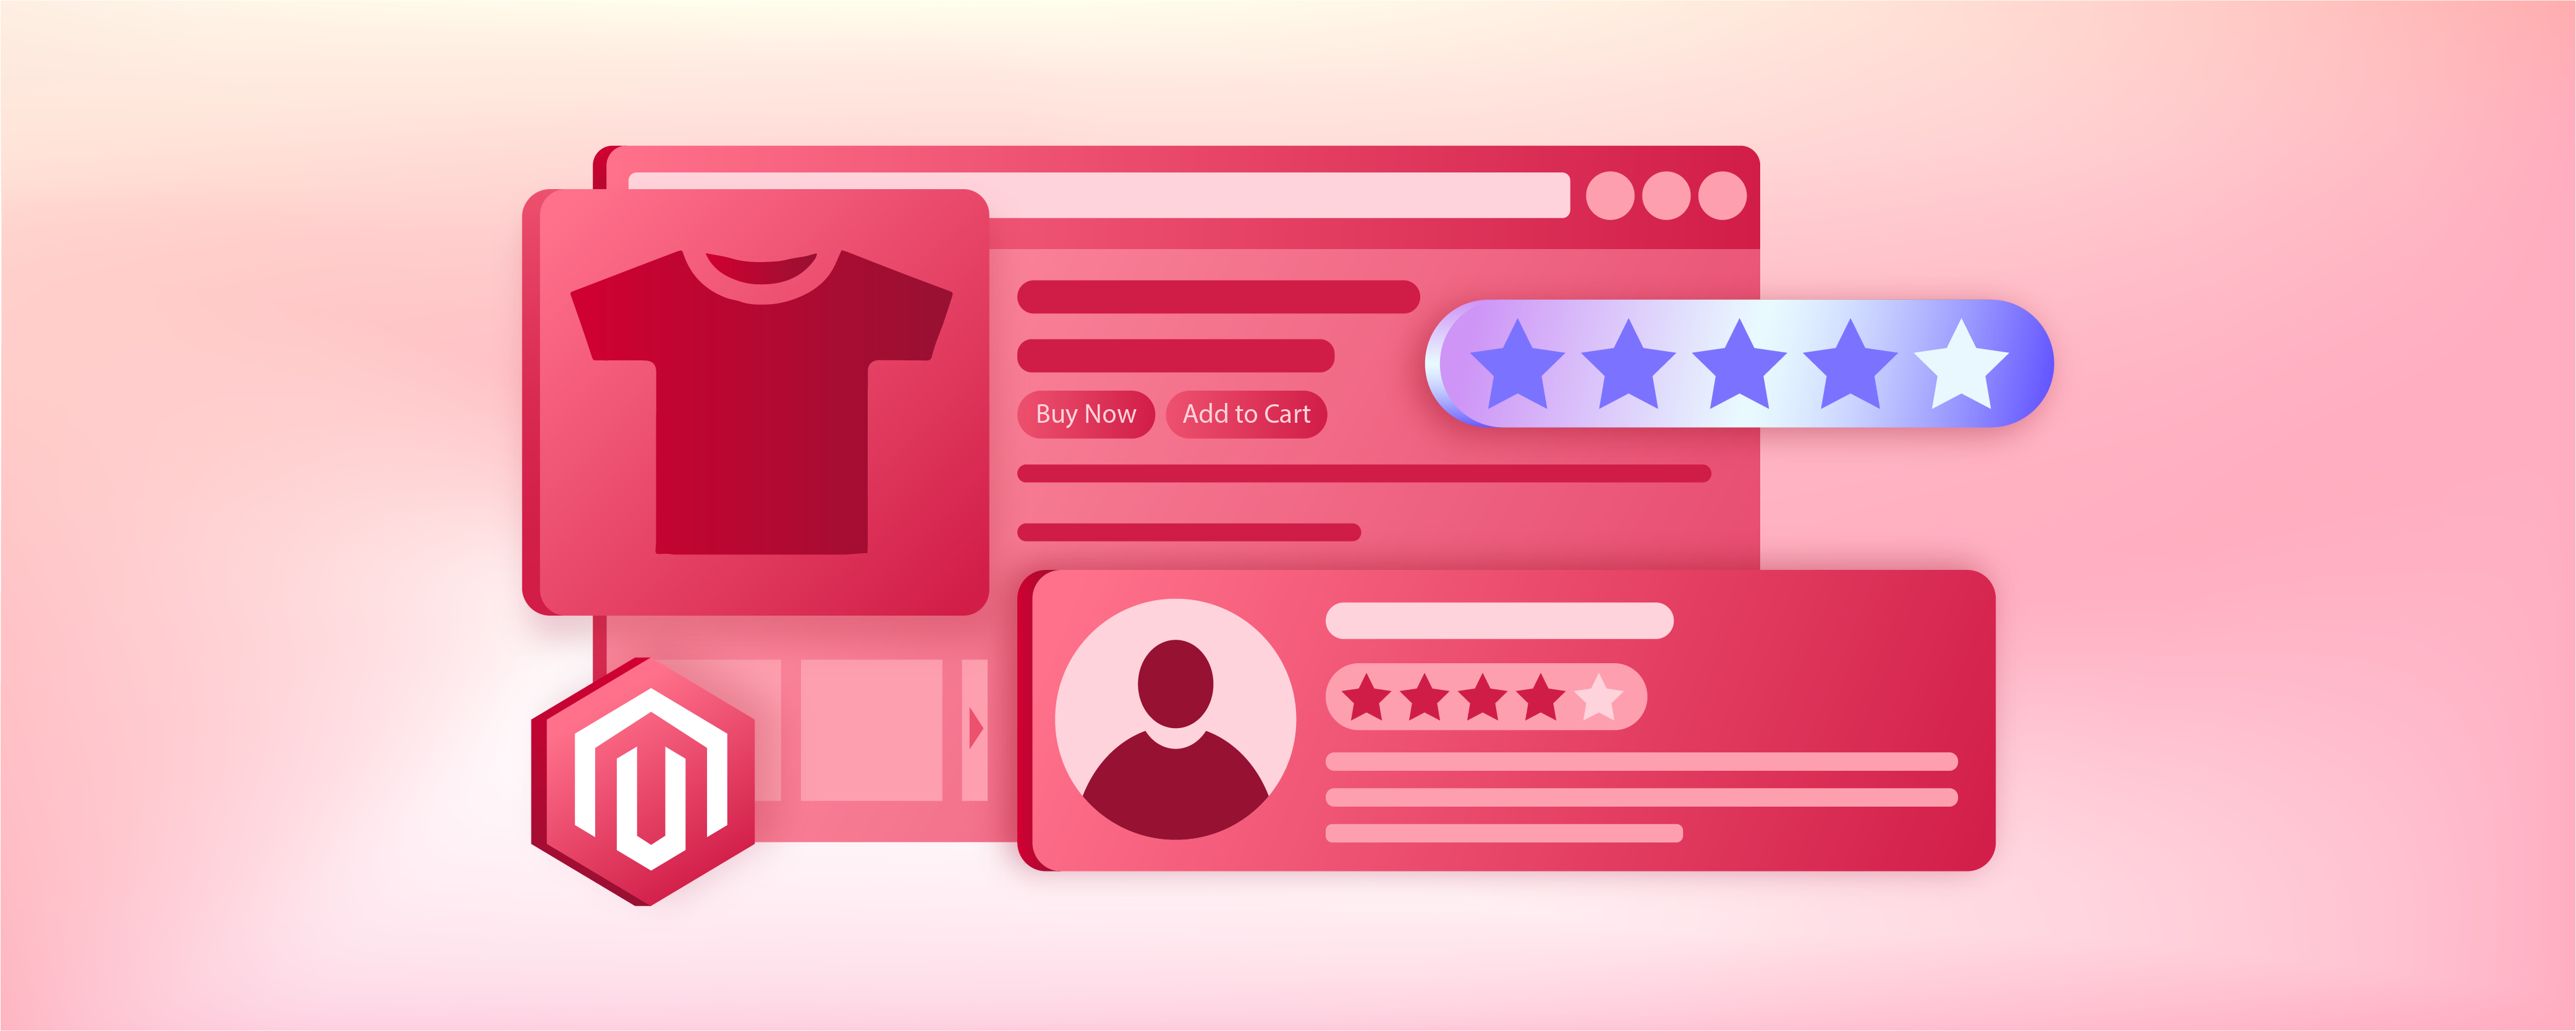 How to Enable Magento 2 Product Reviews?